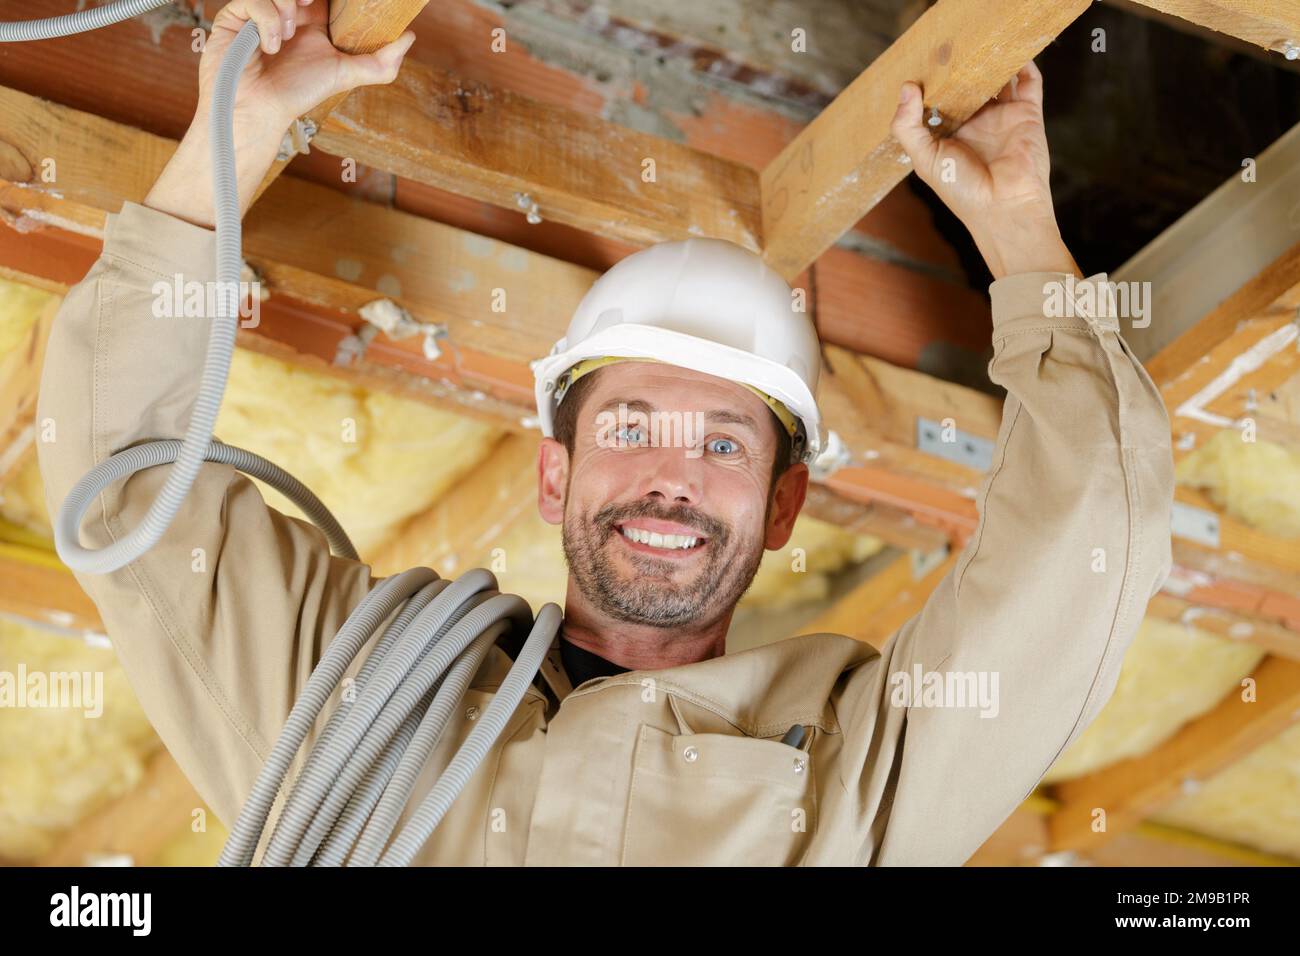 electrician installing ventilation in ceiling Stock Photo